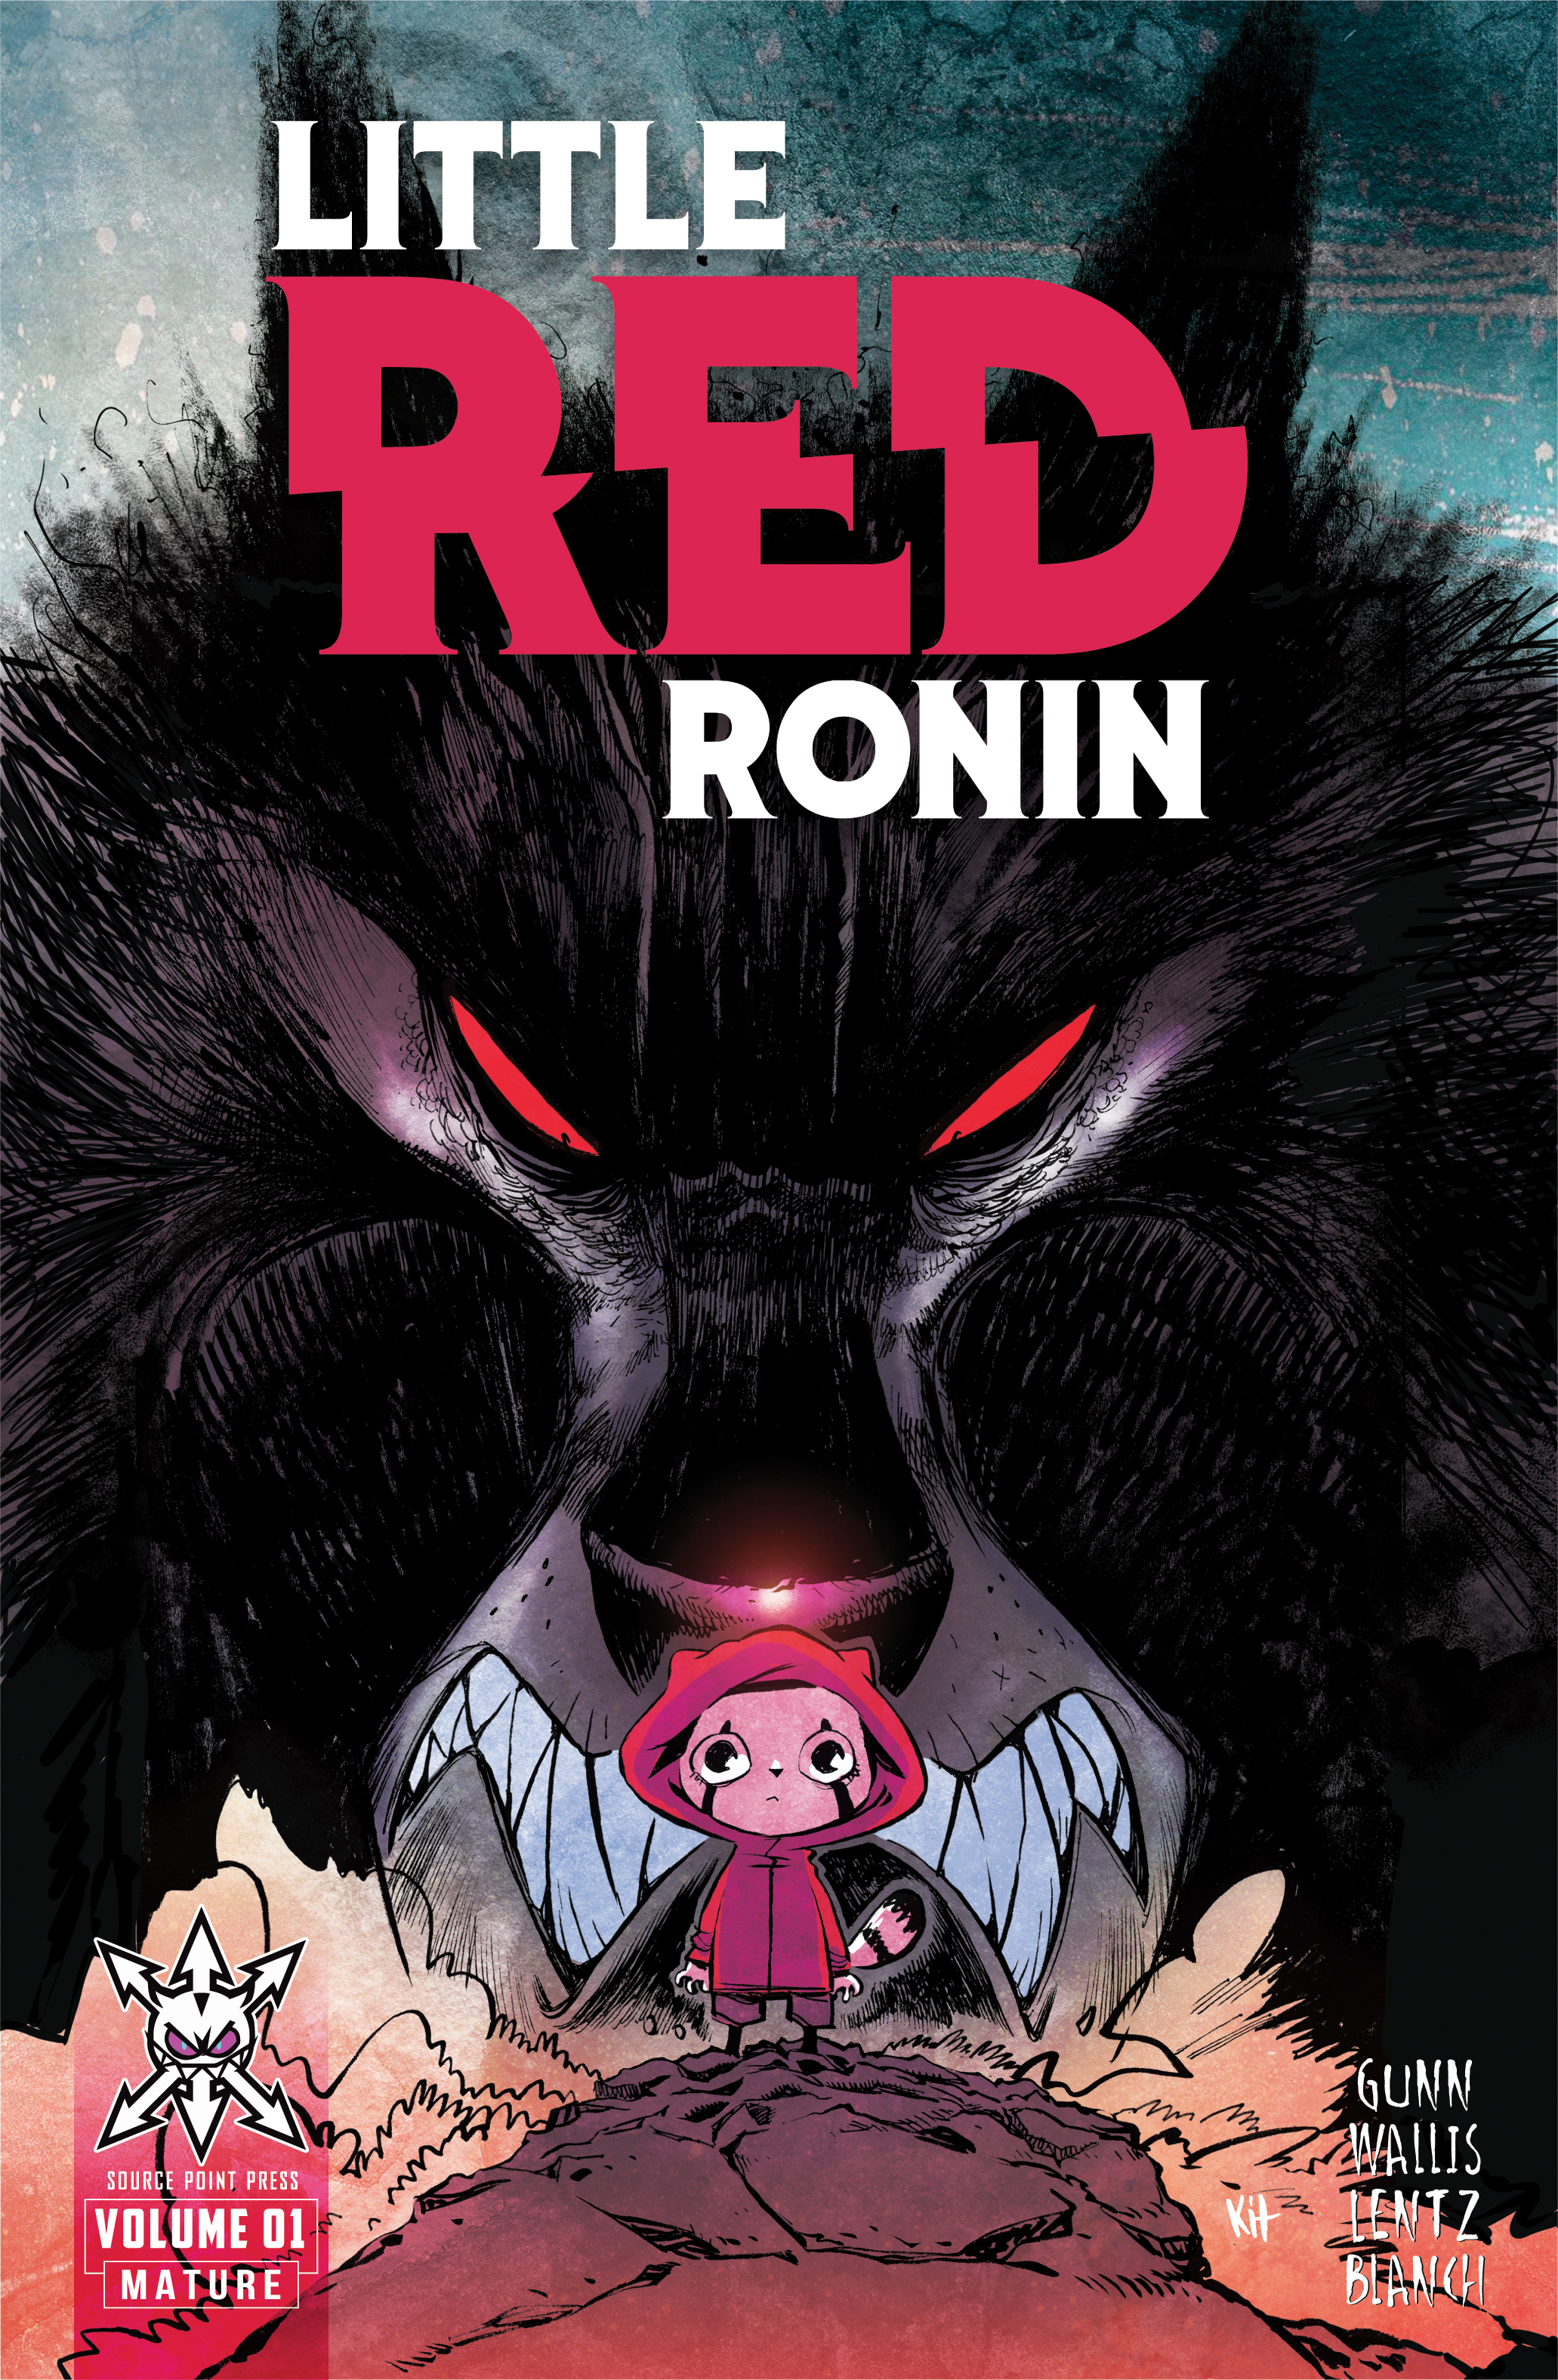 Little Red Ronin Collected Edition Graphic Novel